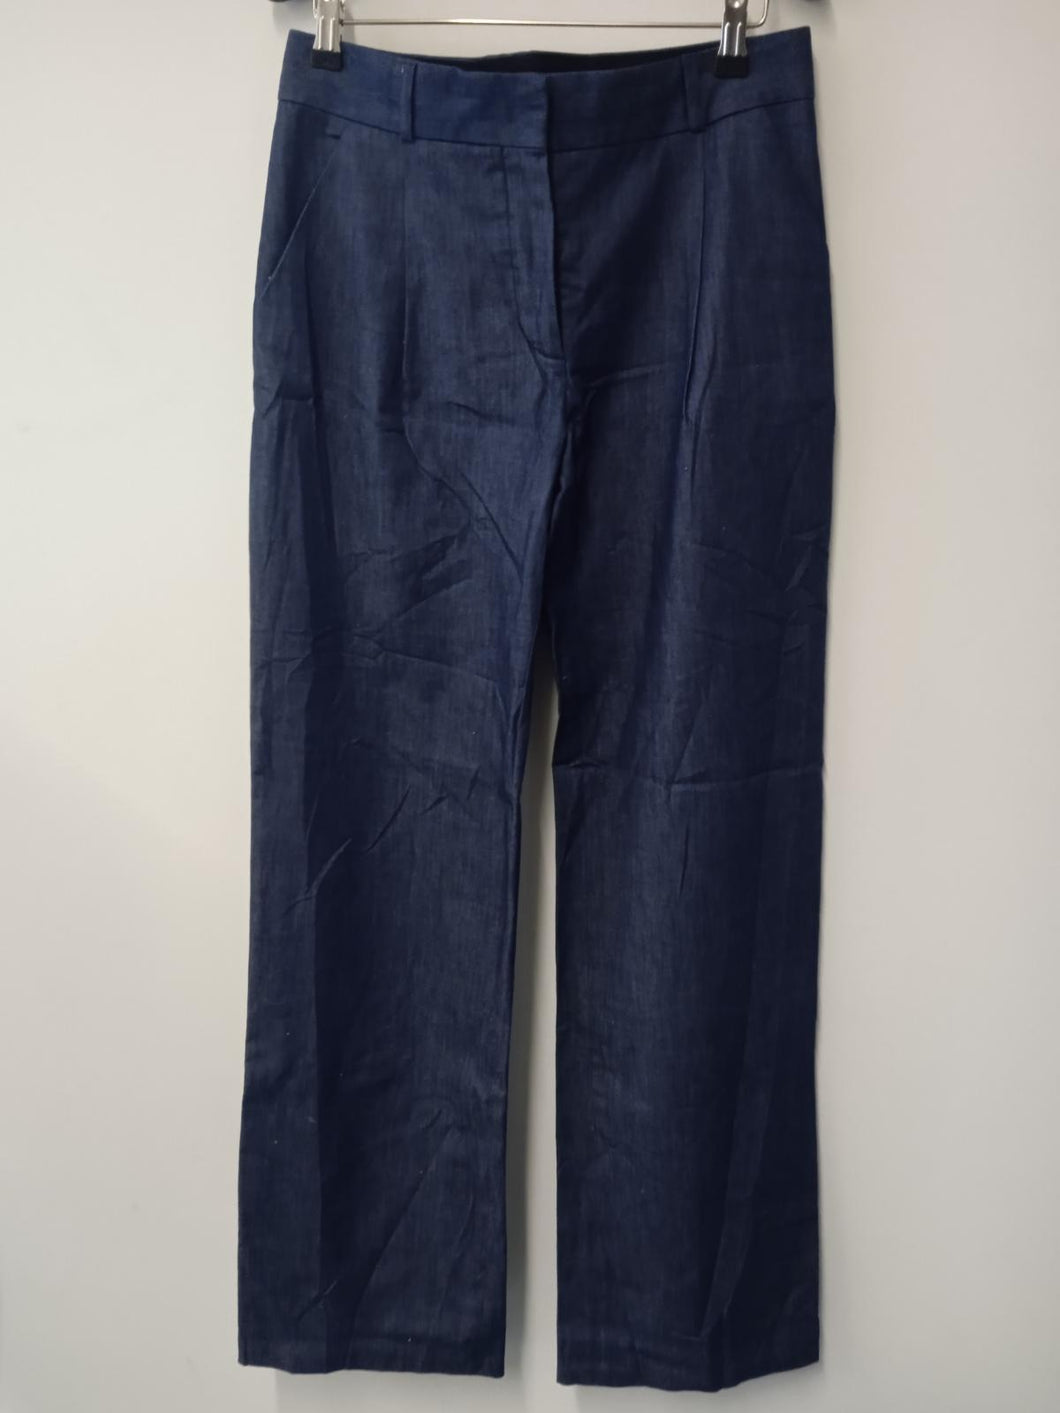 ANTIPODIUM Ladies Navy Blue Cotton Zip Fly Trousers Size W30L35